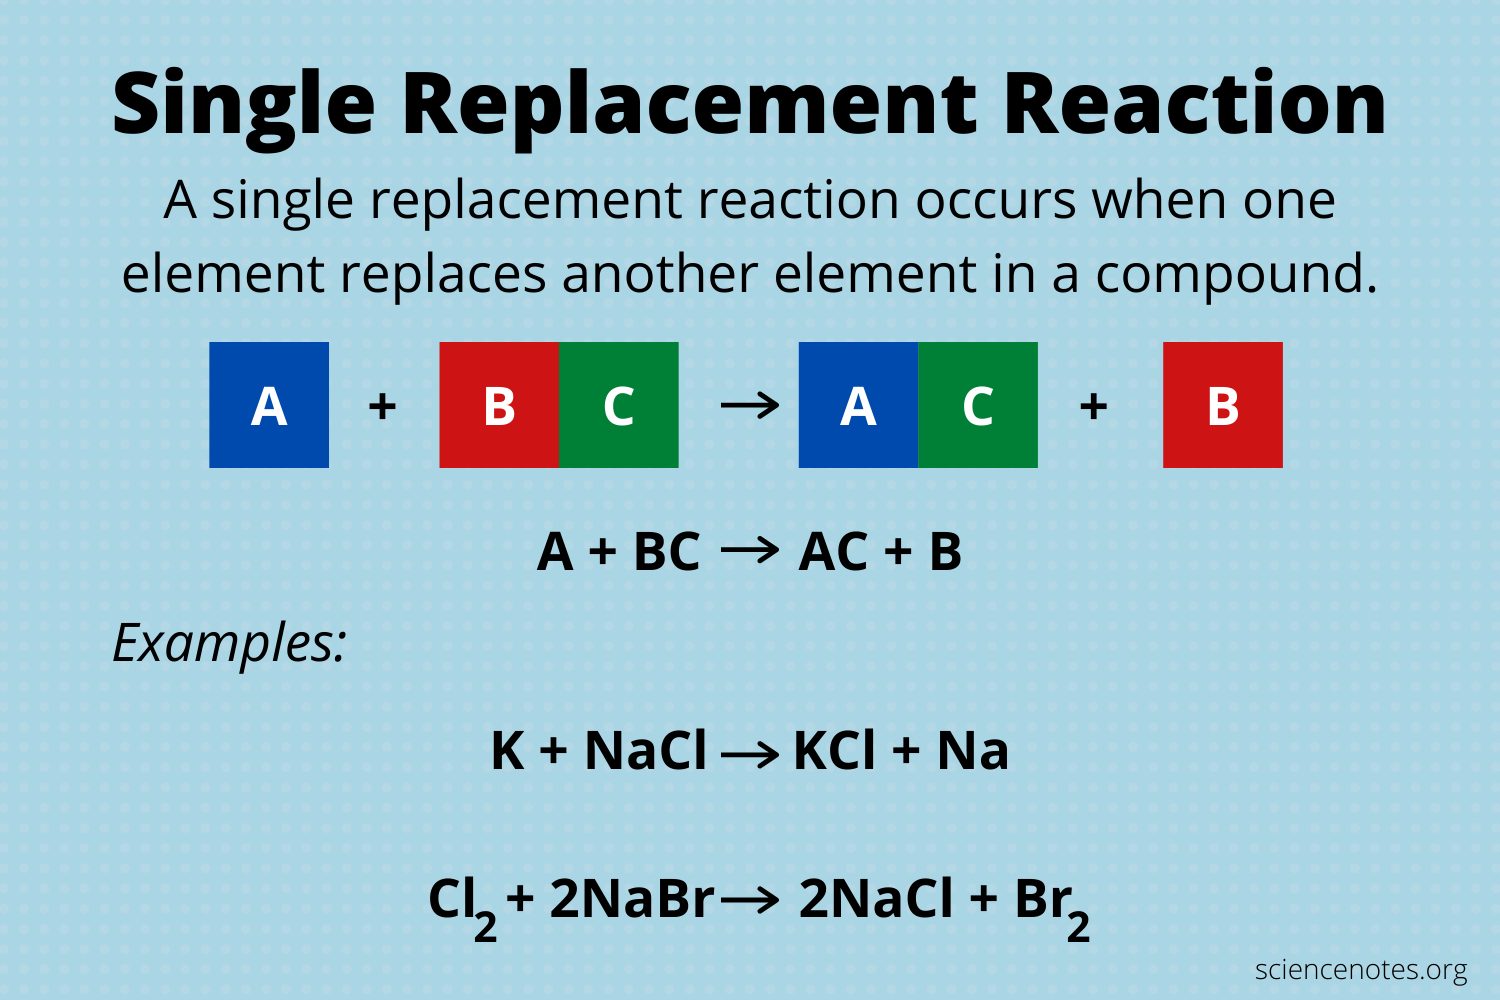 Difference between double and single replacement reactions understand football betting